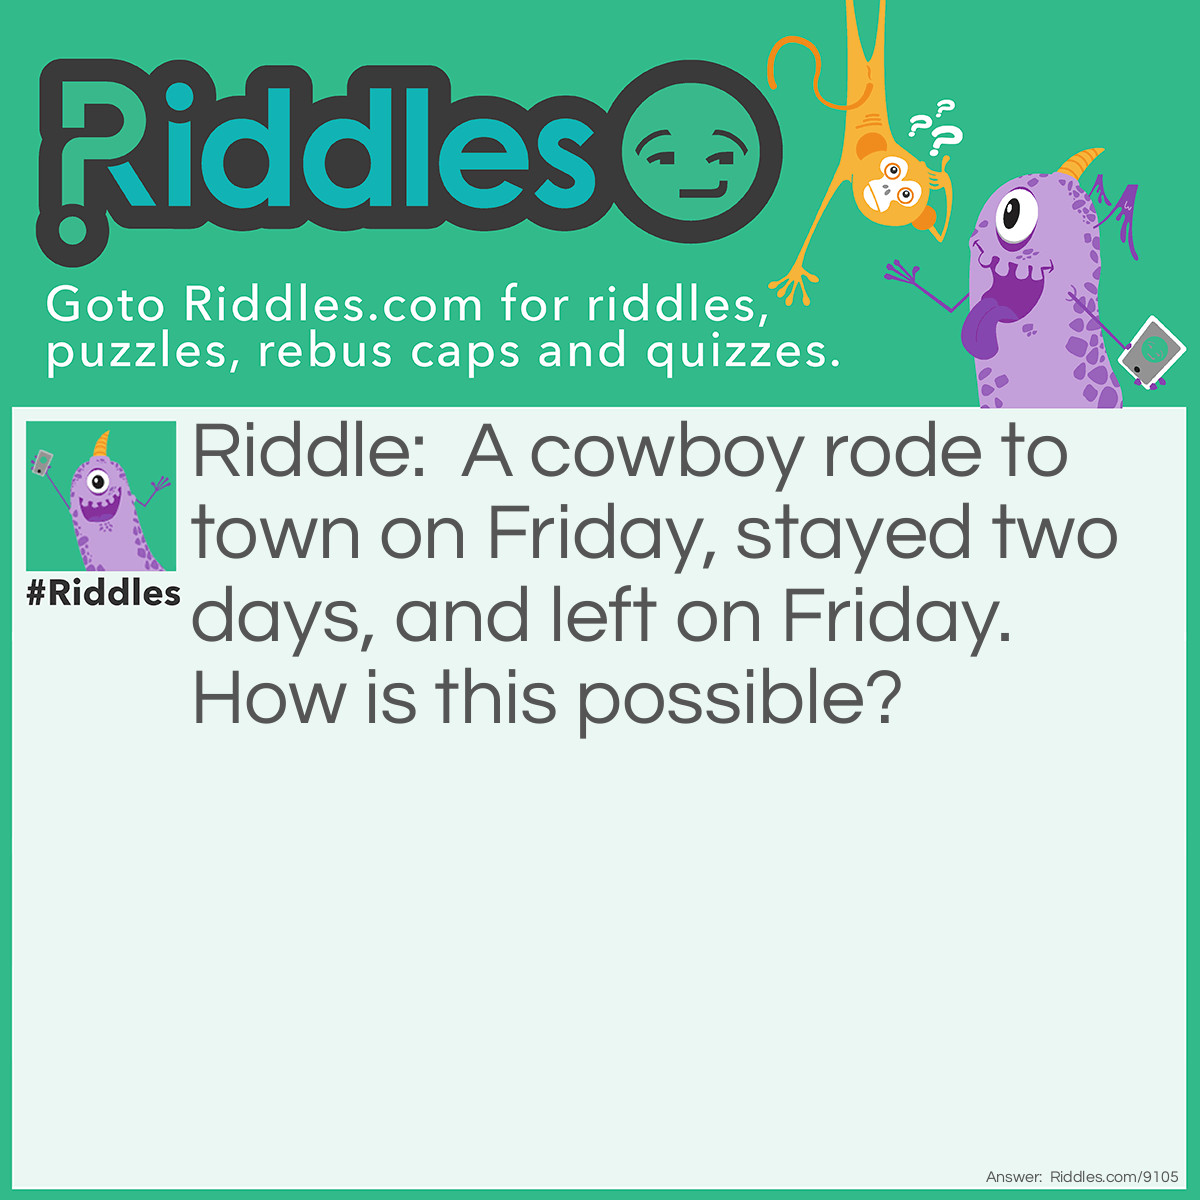 Riddle: A cowboy rode to town on Friday, stayed two days, and left on Friday. How is this possible? Answer: His horse is named Friday.